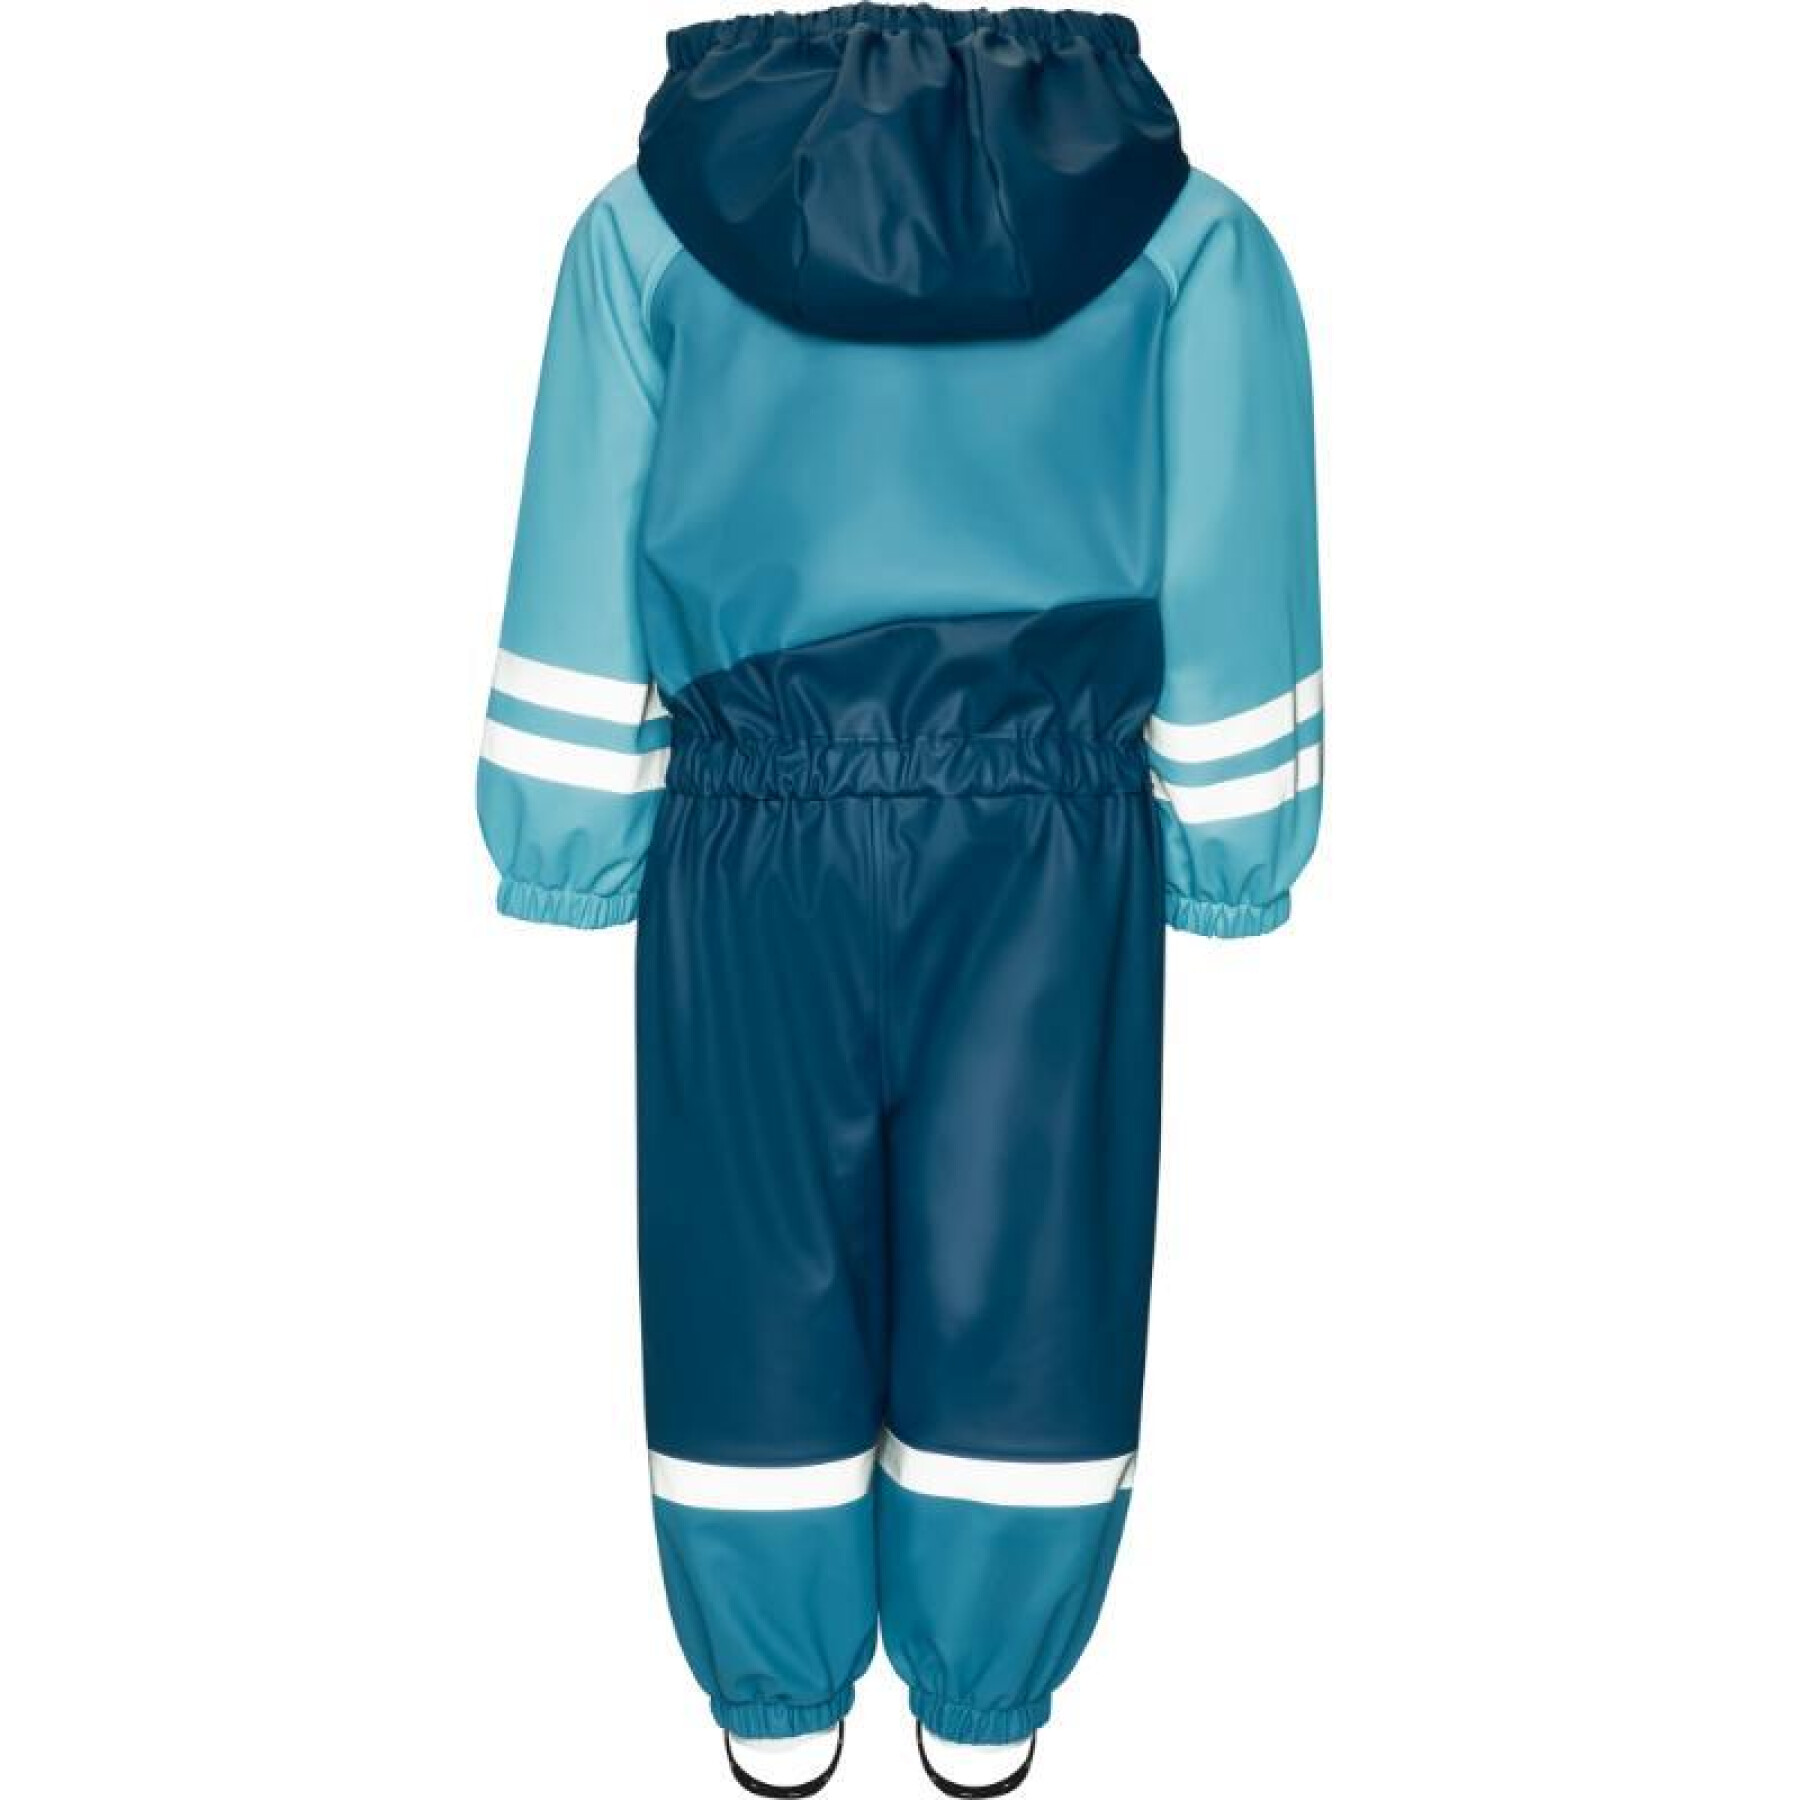 Baby overalls with fleece lining Playshoes